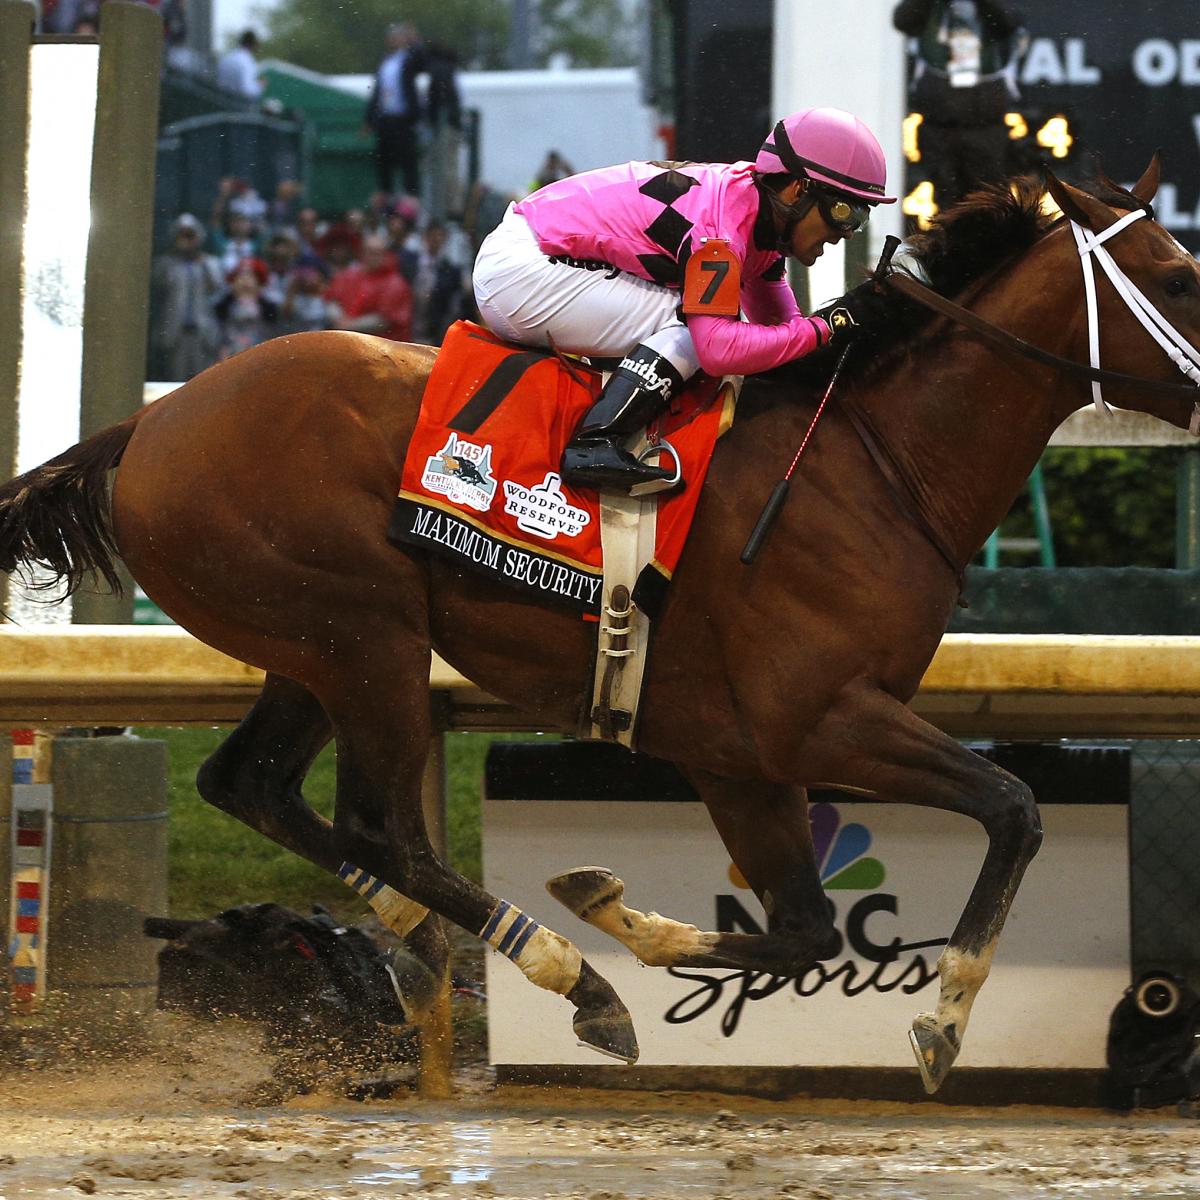 Video Listen to Explanation of Maximum Security's 2019 Kentucky Derby